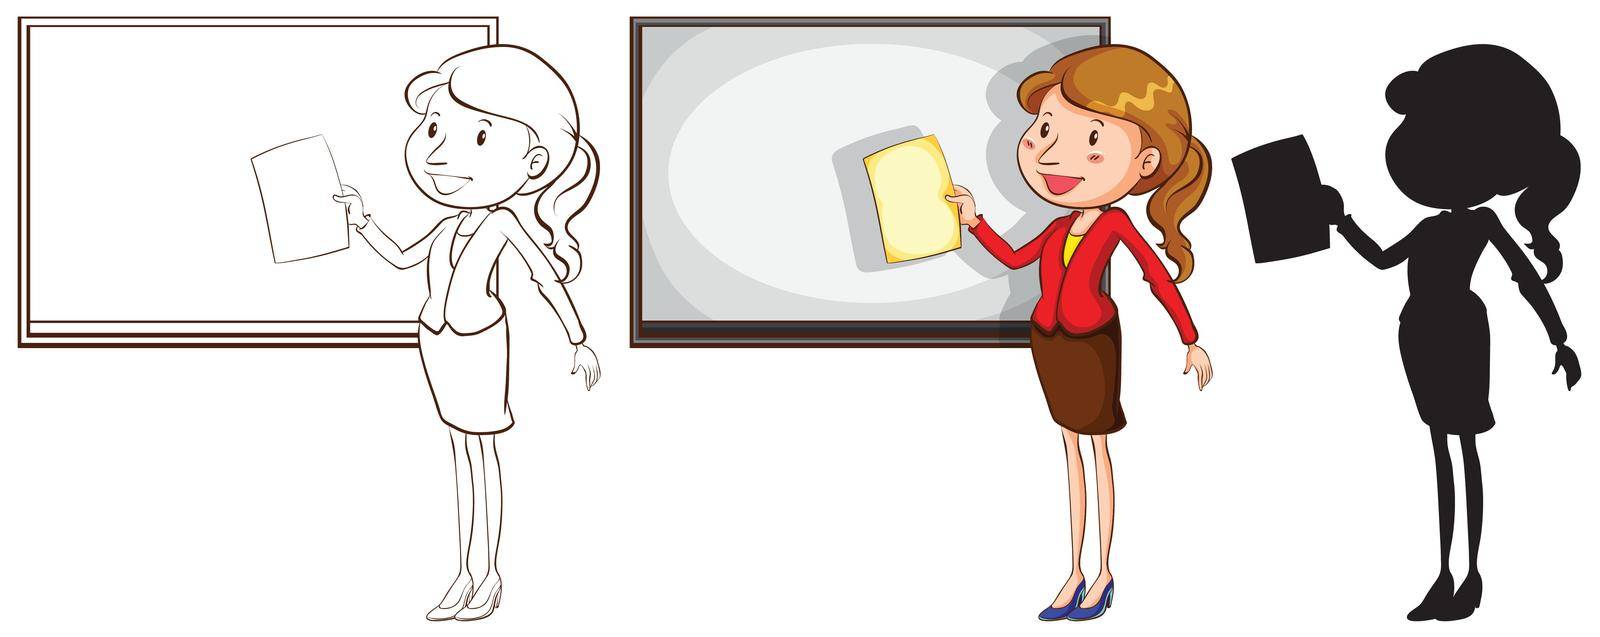 Illustration of the sketches of a teacher in different colours on a white background